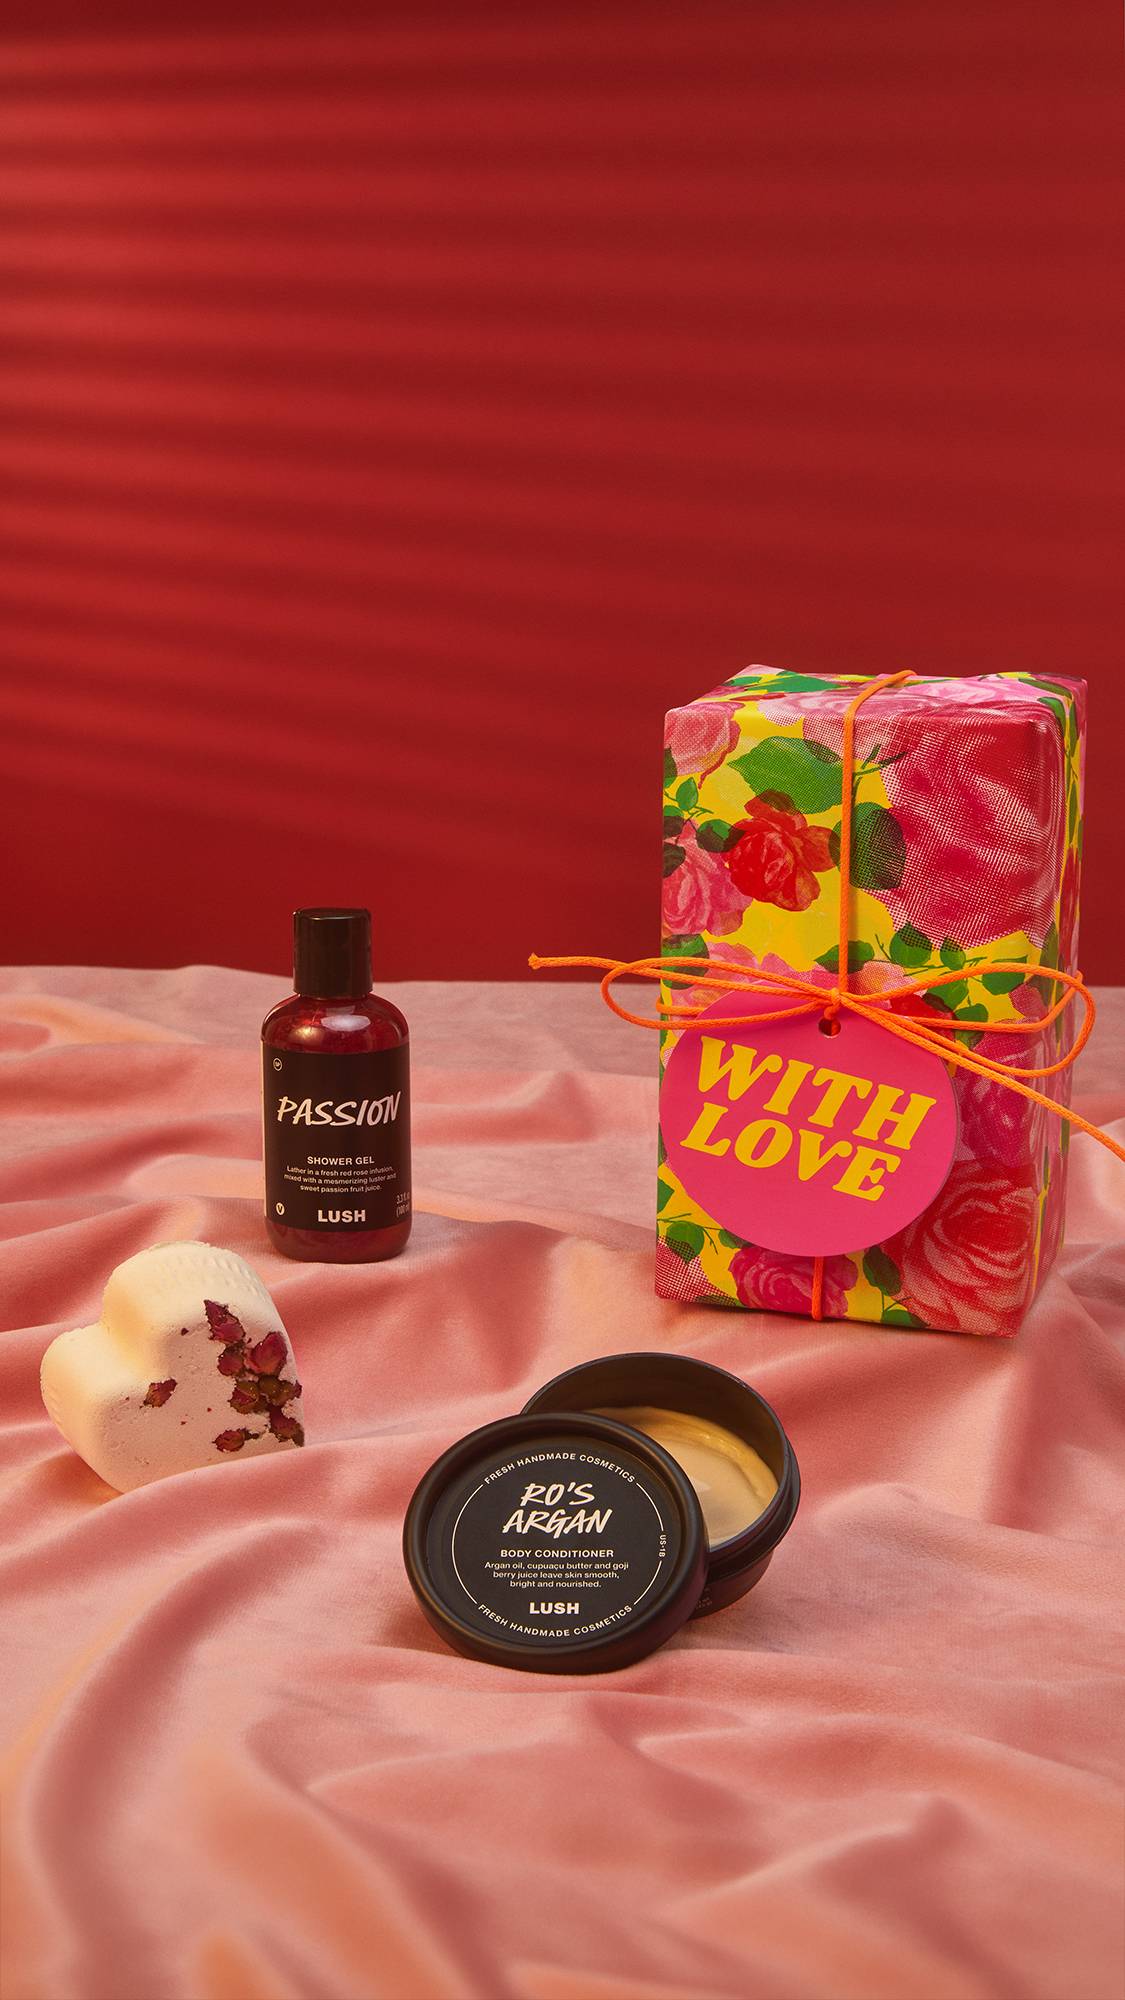 Image shows a red background and a dusky pink satin sheet laid out. The With Love gift box sits on top along with 3 Lush products.